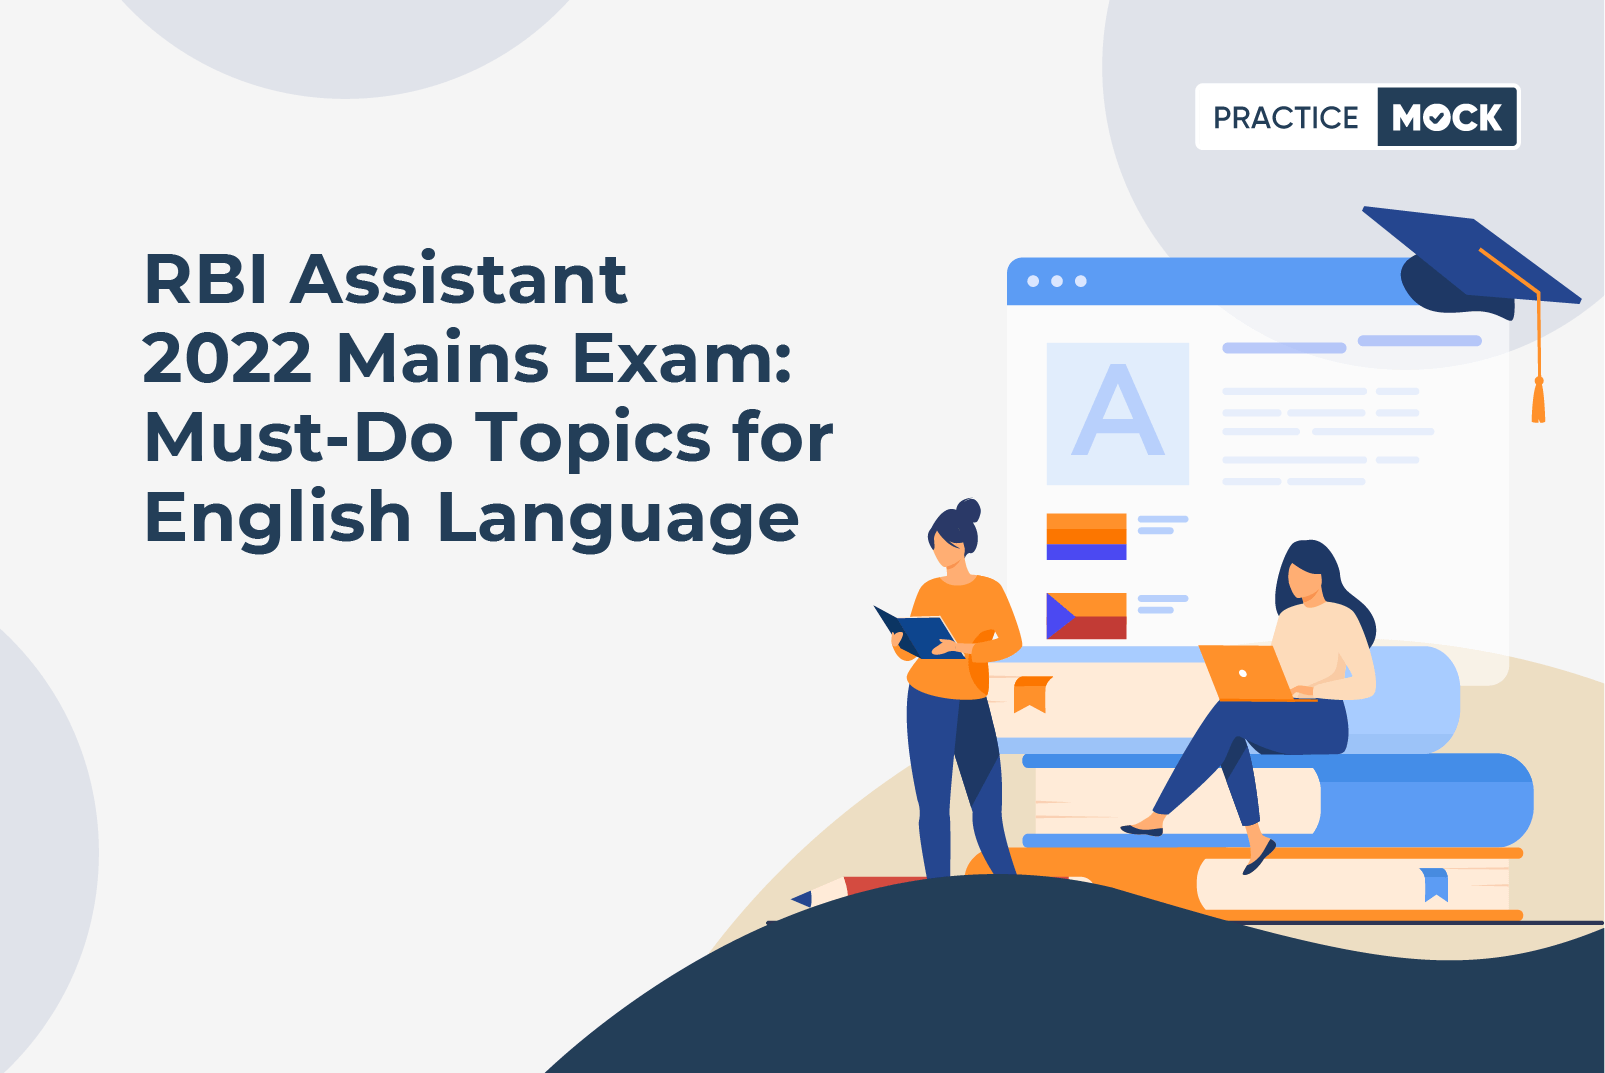 RBI Assistant 2022 Mains Exam: Important Topics for English Language